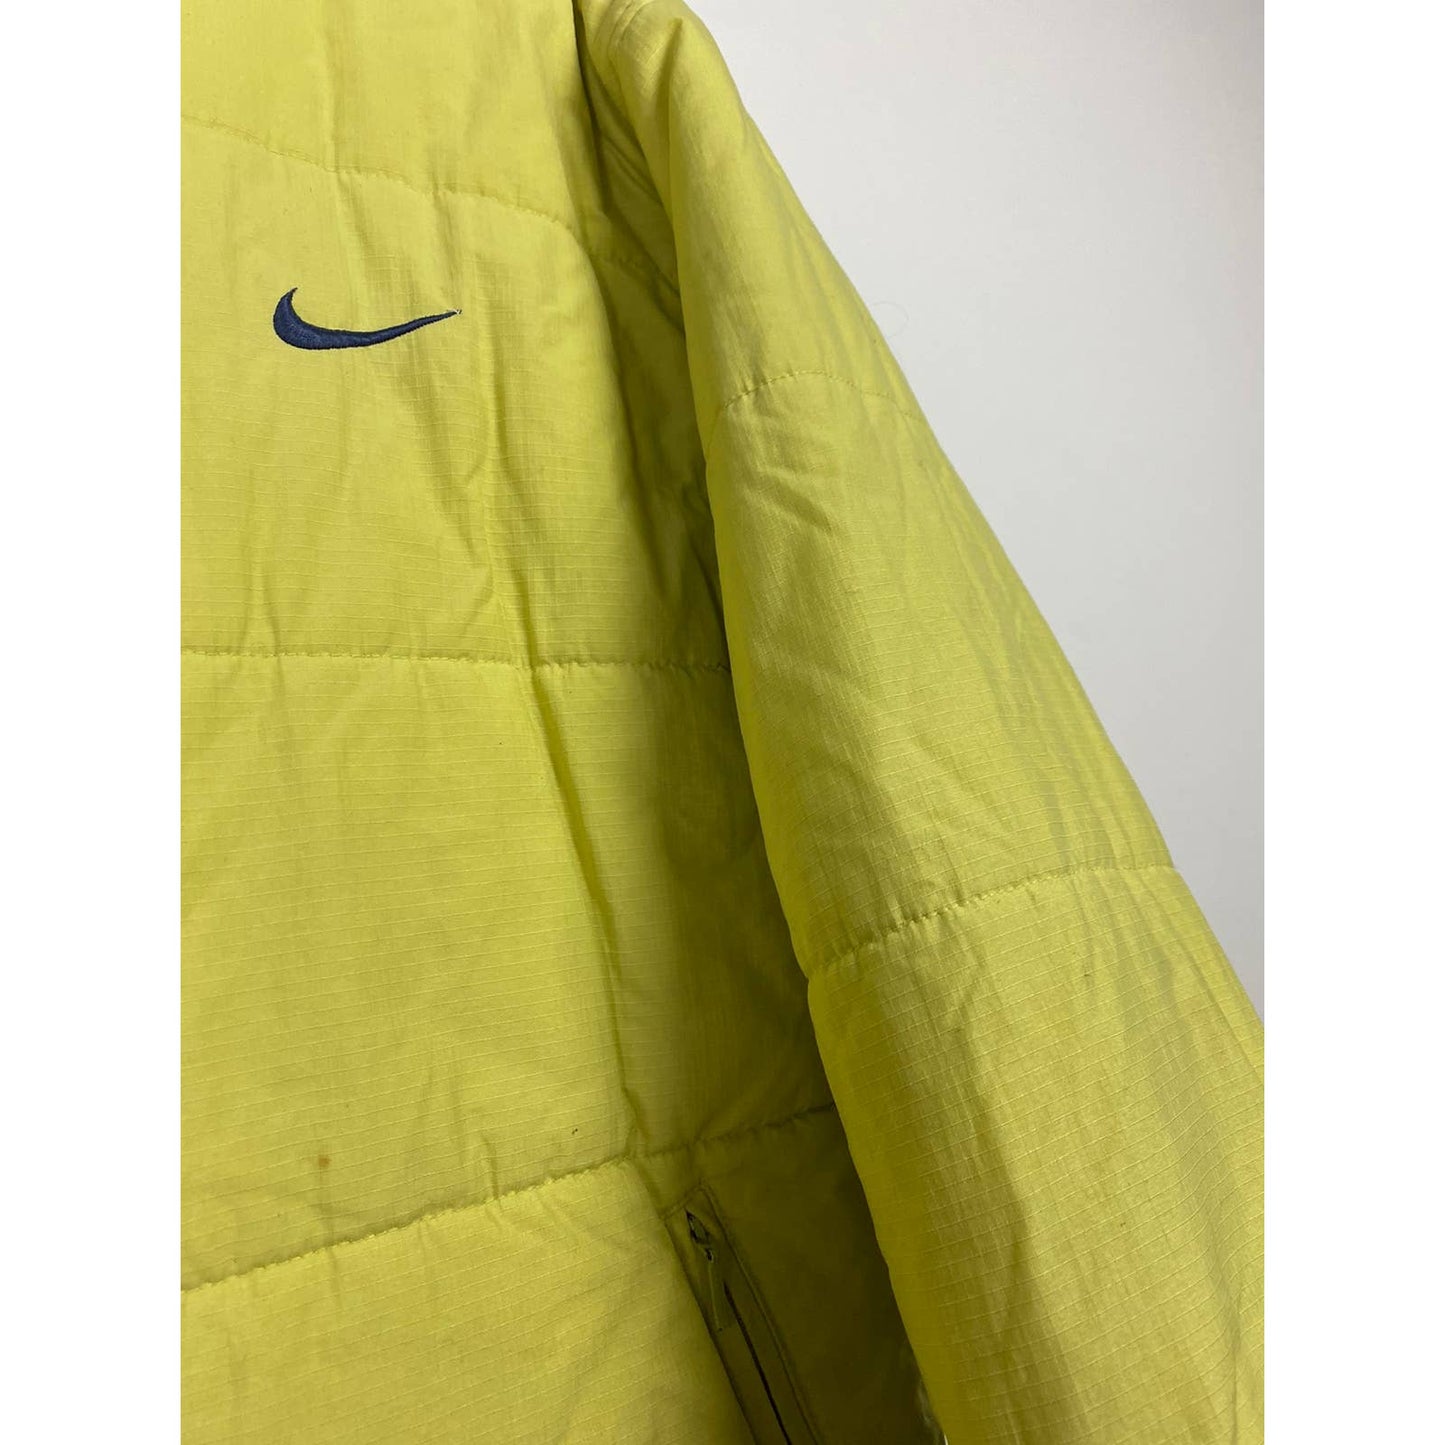 90s Nike vintage spell out puffer jacket big logo